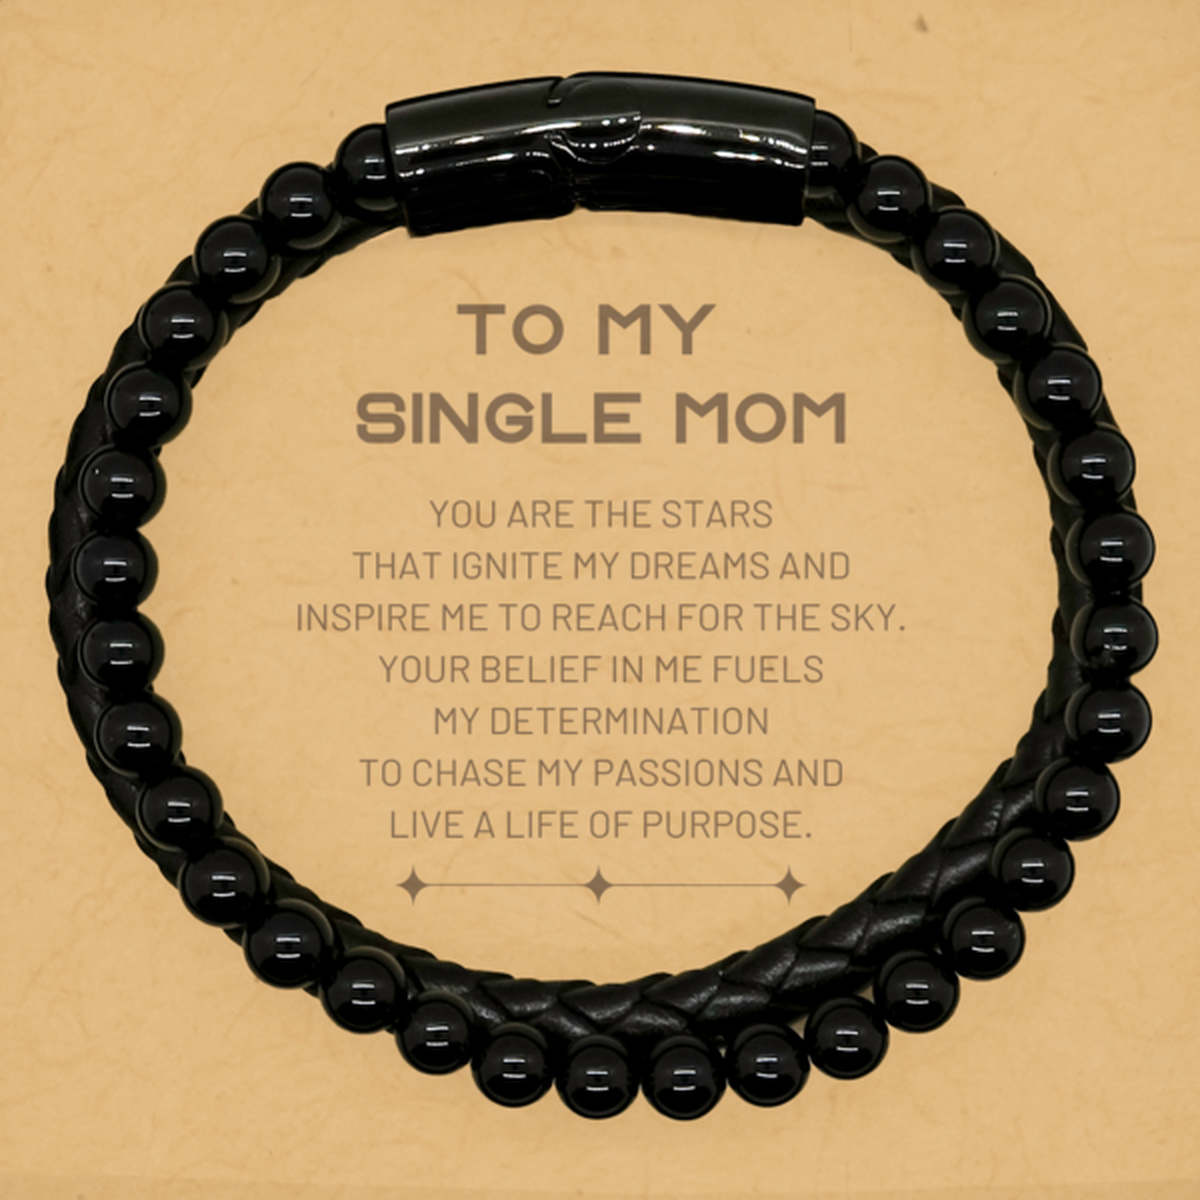 To My Single Mom Stone Leather Bracelets, You are the stars that ignite my dreams and inspire me to reach for the sky, Birthday Unique Gifts For Single Mom, Thank You Gifts For Single Mom